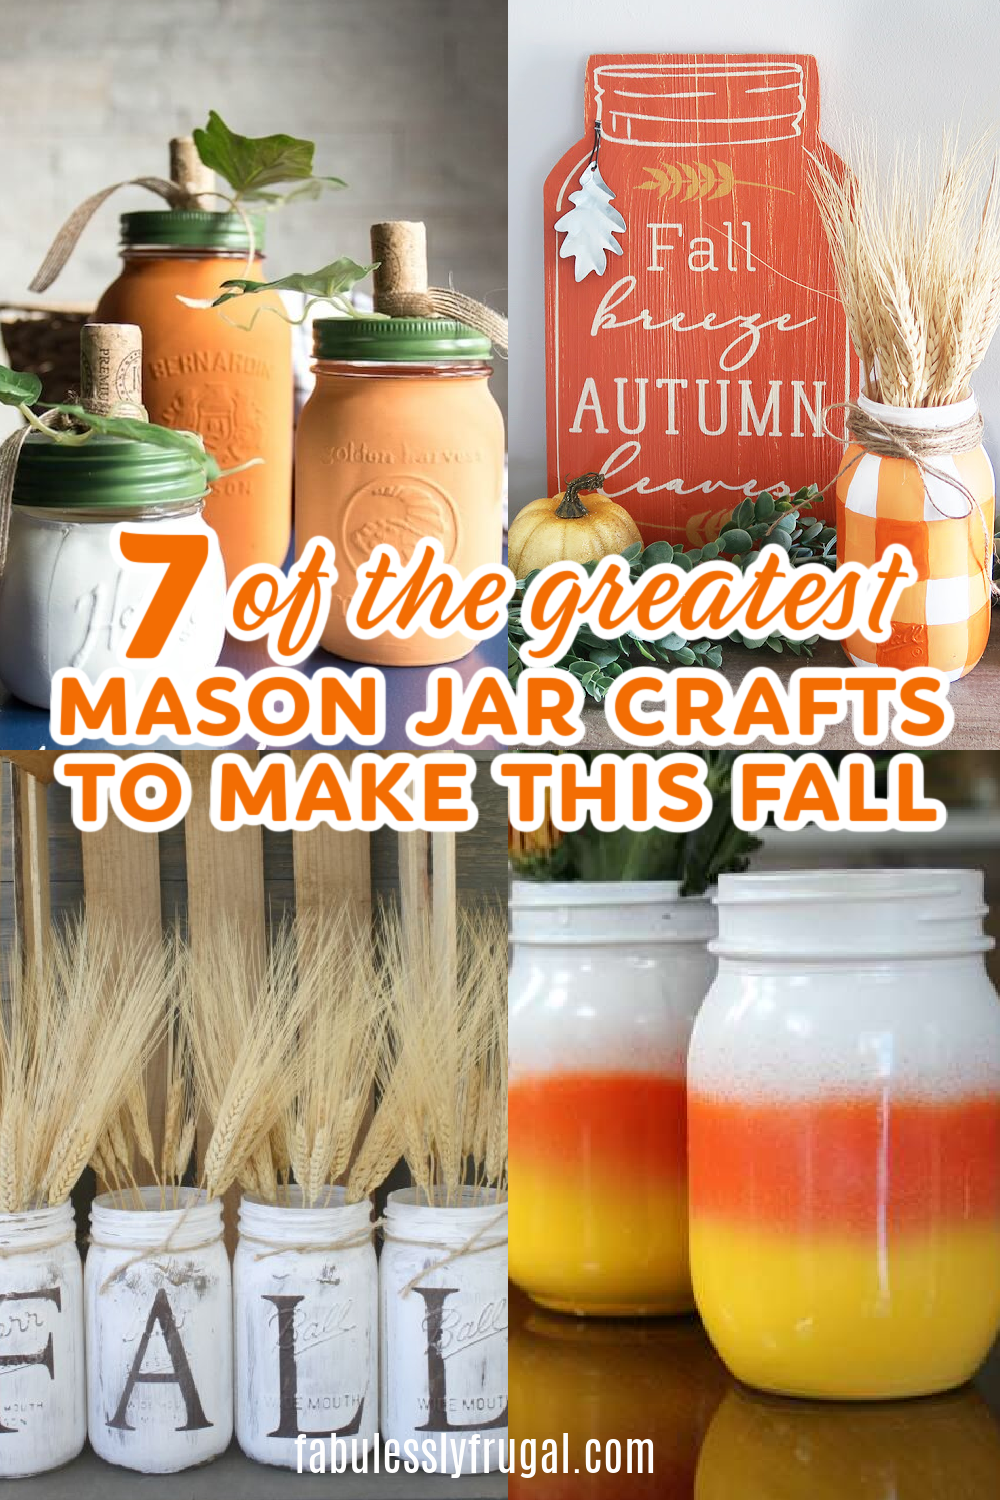 https://fabulesslyfrugal.com/wp-content/uploads/2020/09/7-OF-THE-GREATEST-MASON-JAR-CRAFTS-TO-MAKE-THIS-FALL1.png